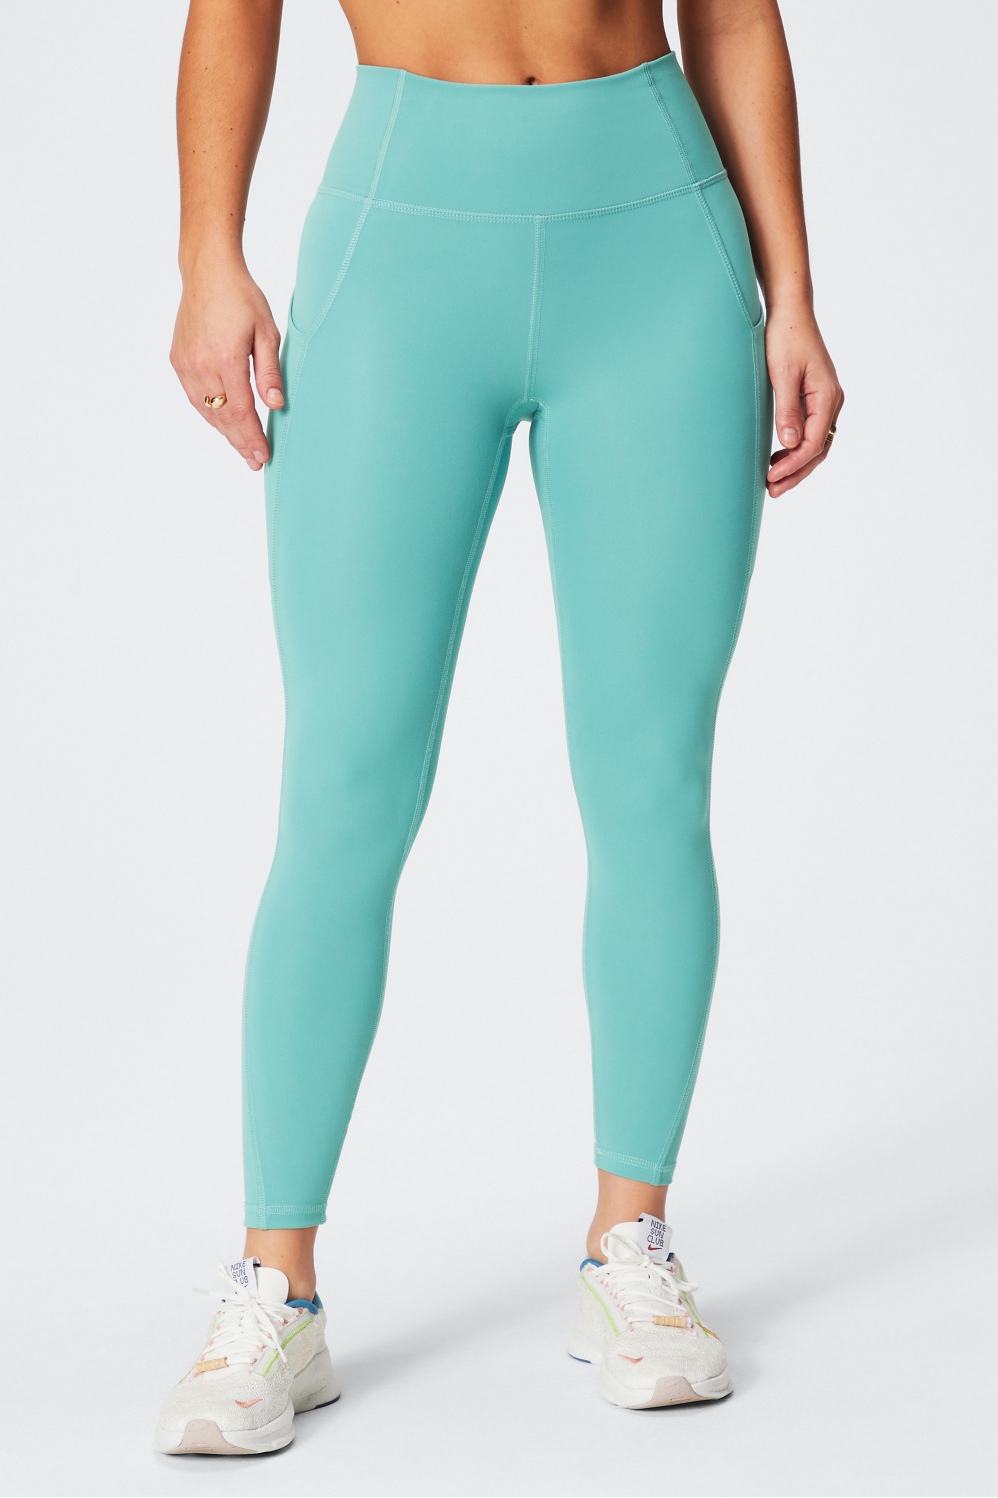 Fabletics Leggings Store Near Mesquite Tx  International Society of  Precision Agriculture